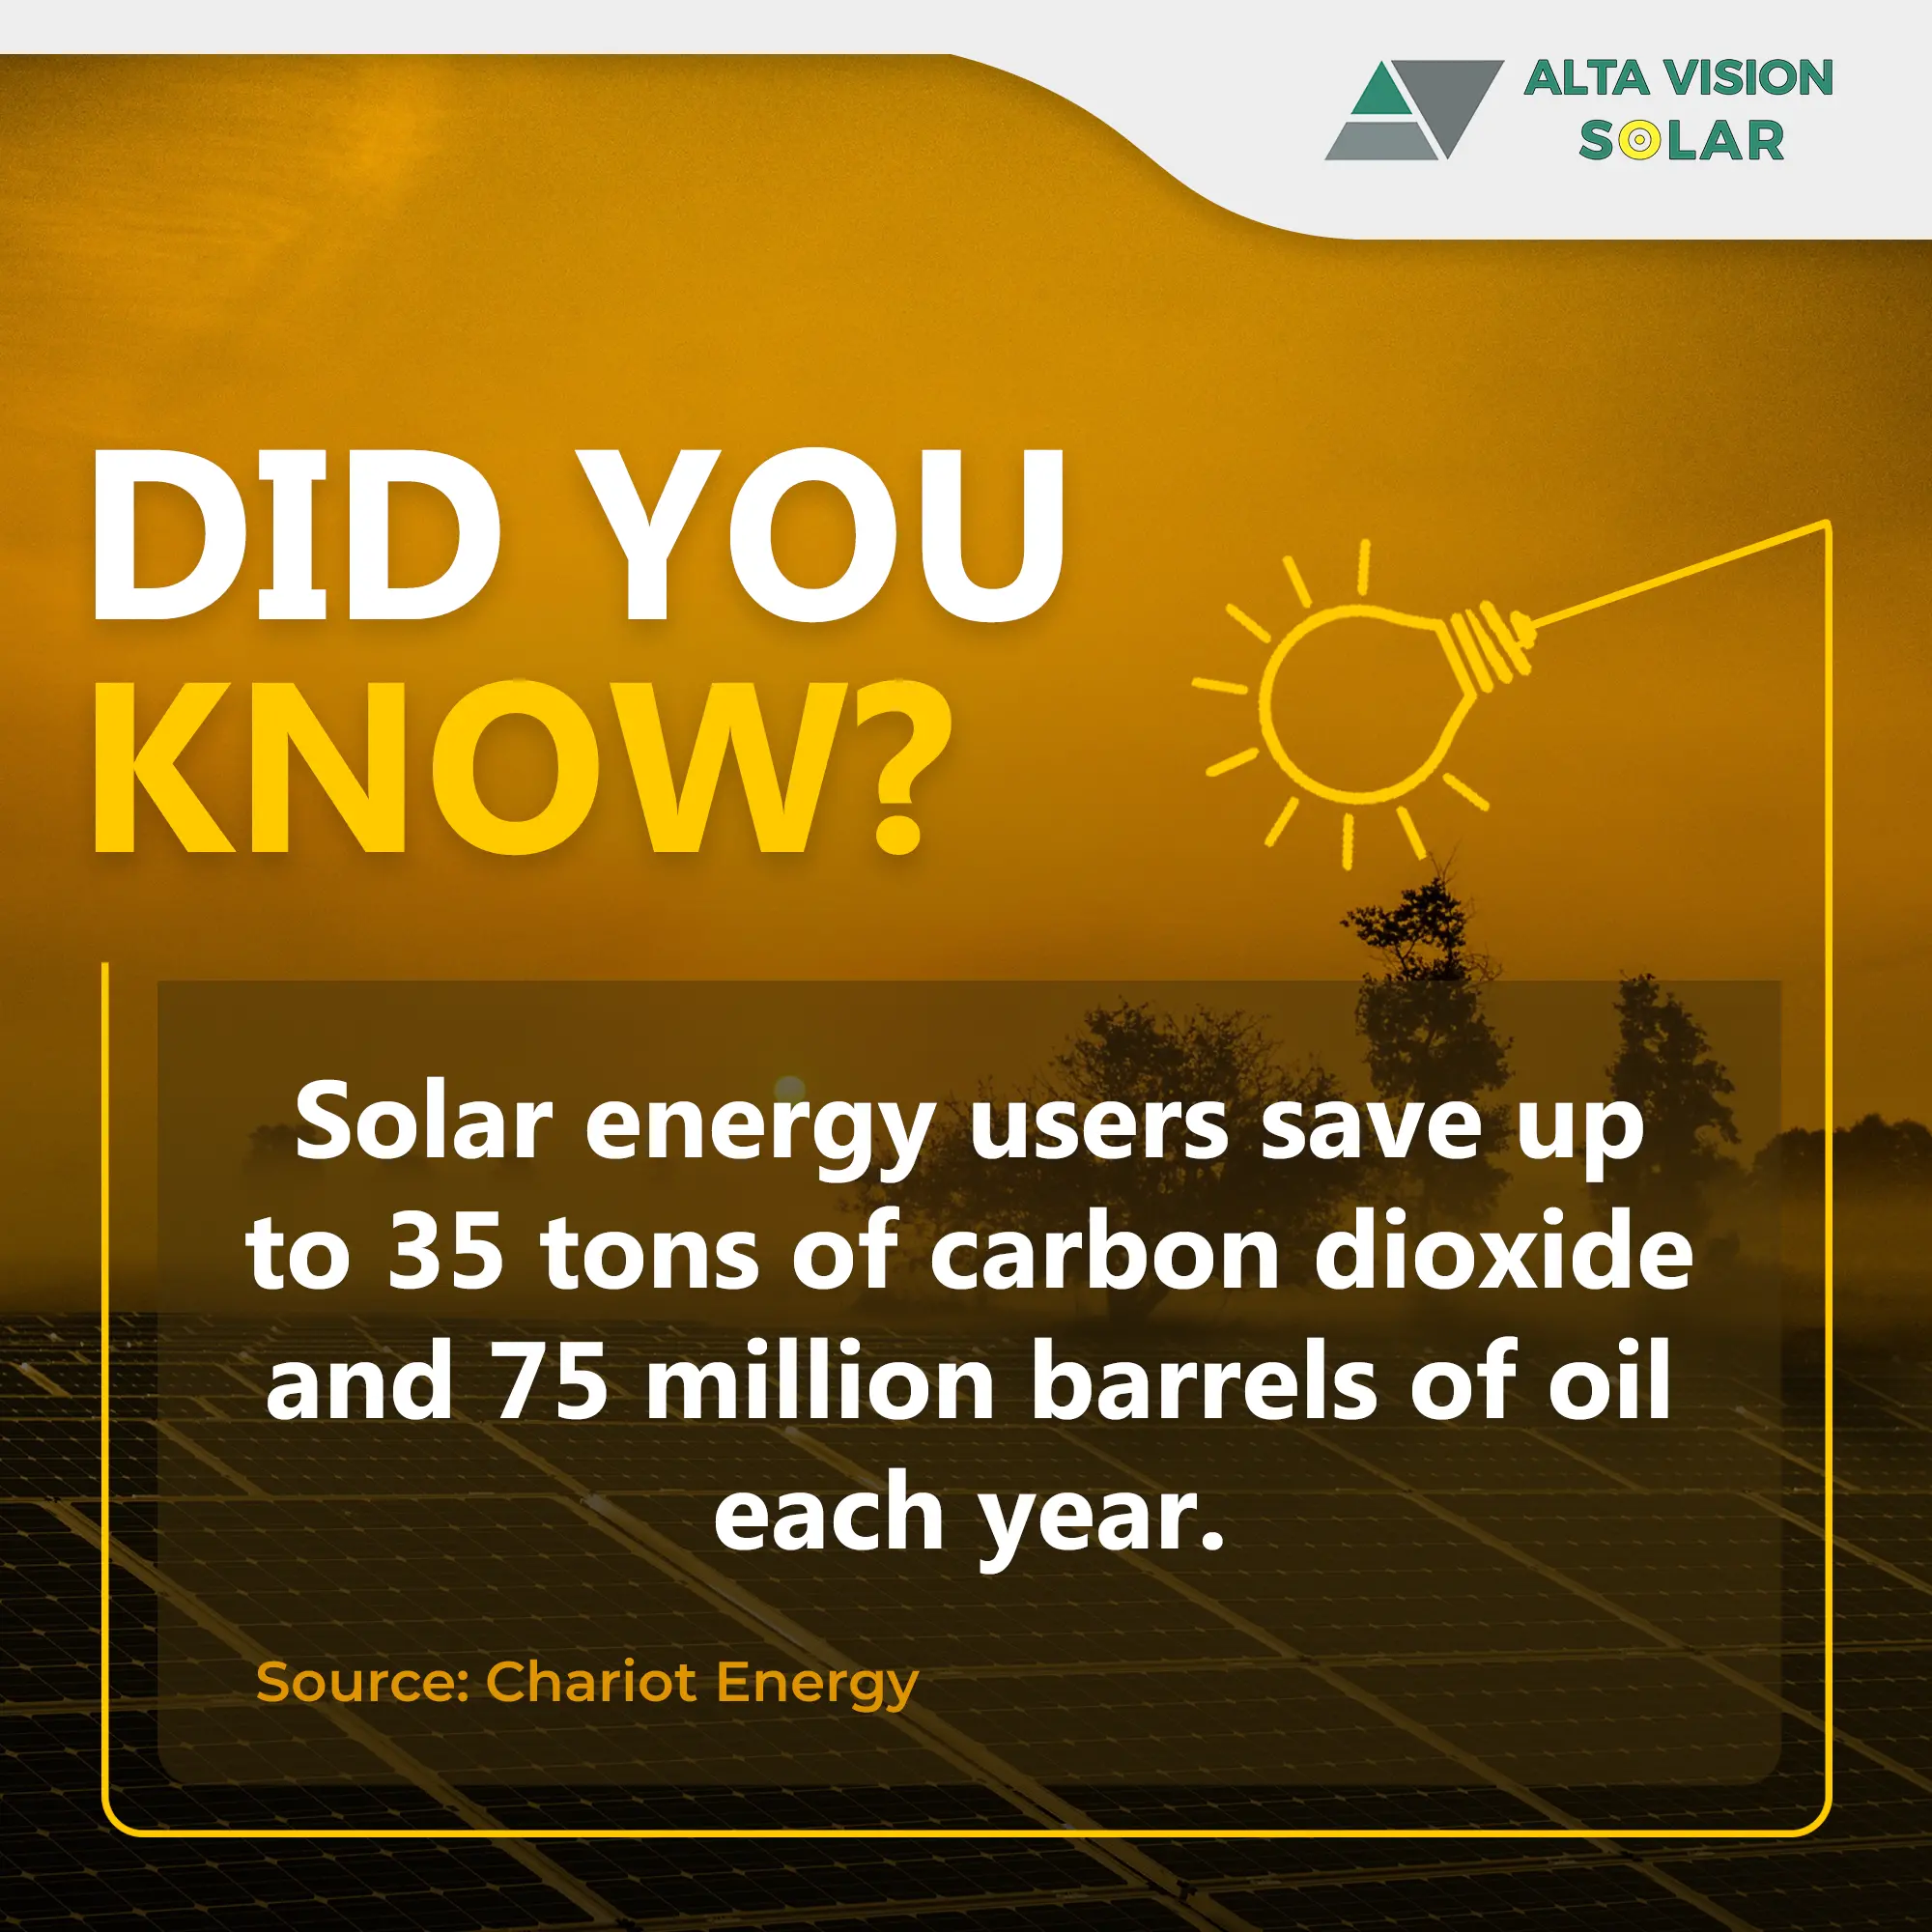 Solar energy users save up to 35 tons of carbon dioxide and 75 million barrels of oil each year